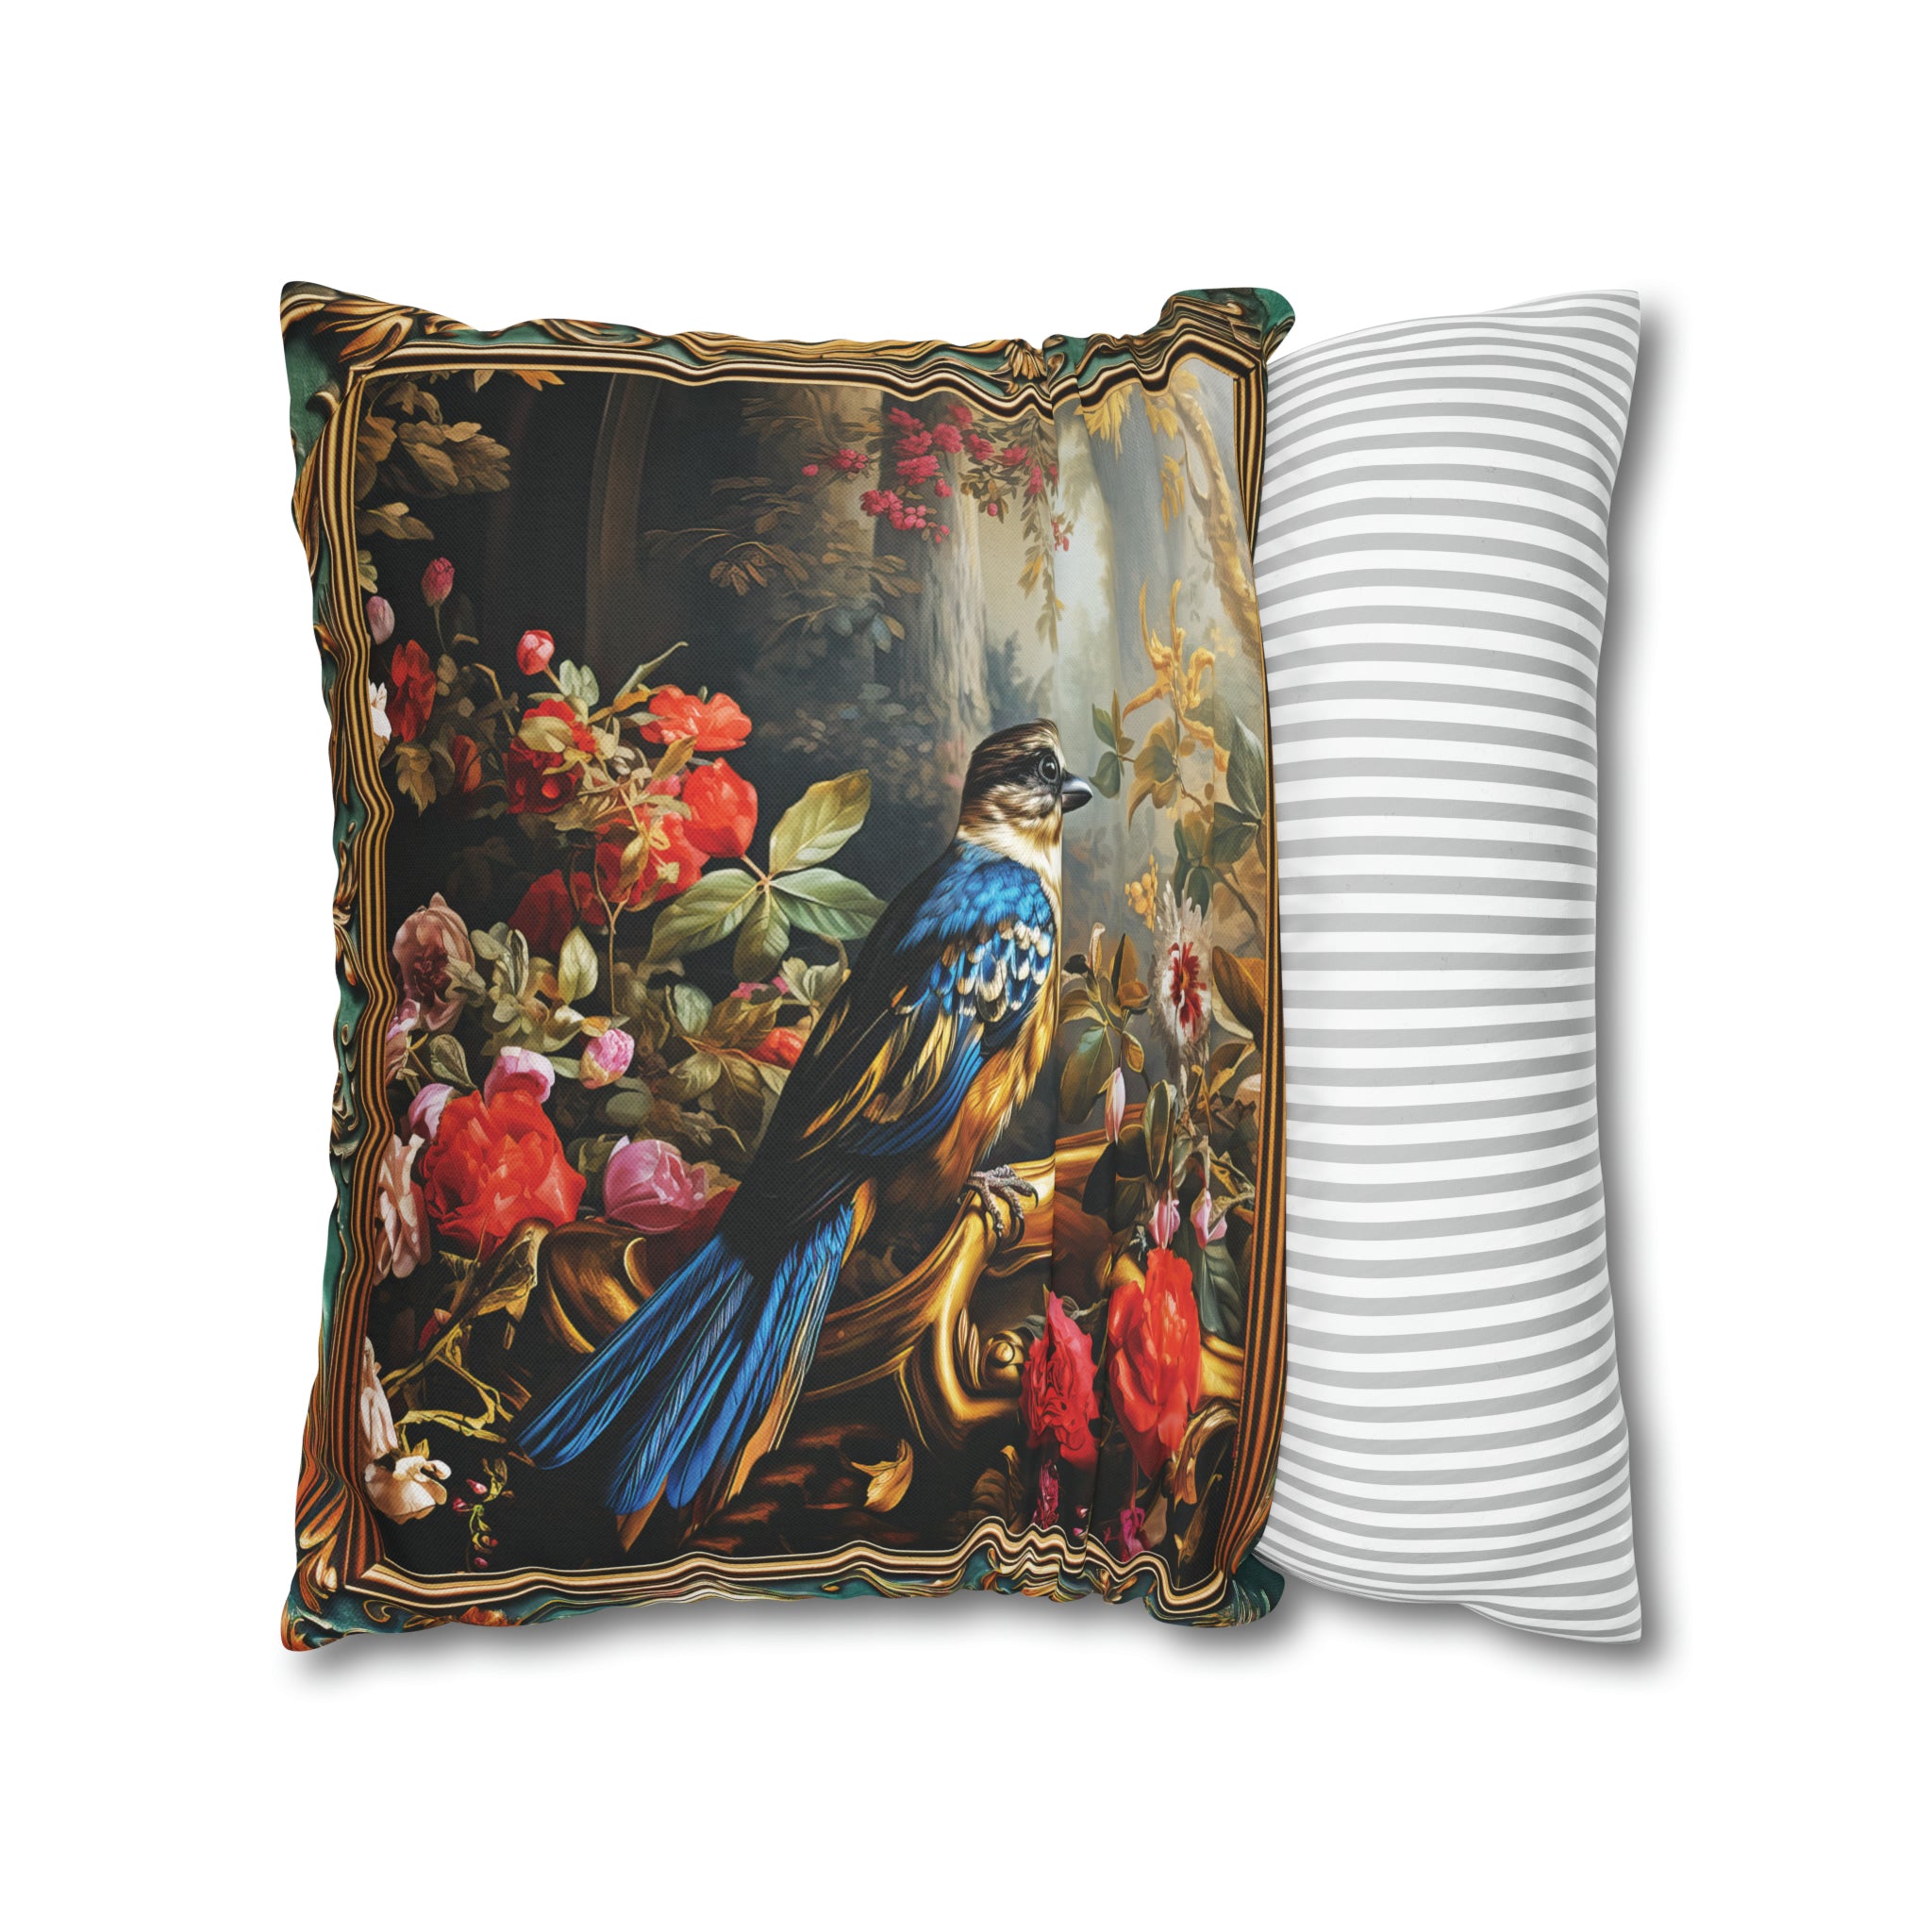 Square Pillow Case 18" x 18", CASE ONLY, no pillow form, original Art , a Colorful Blue & Gold Bird on a Flowering Branch